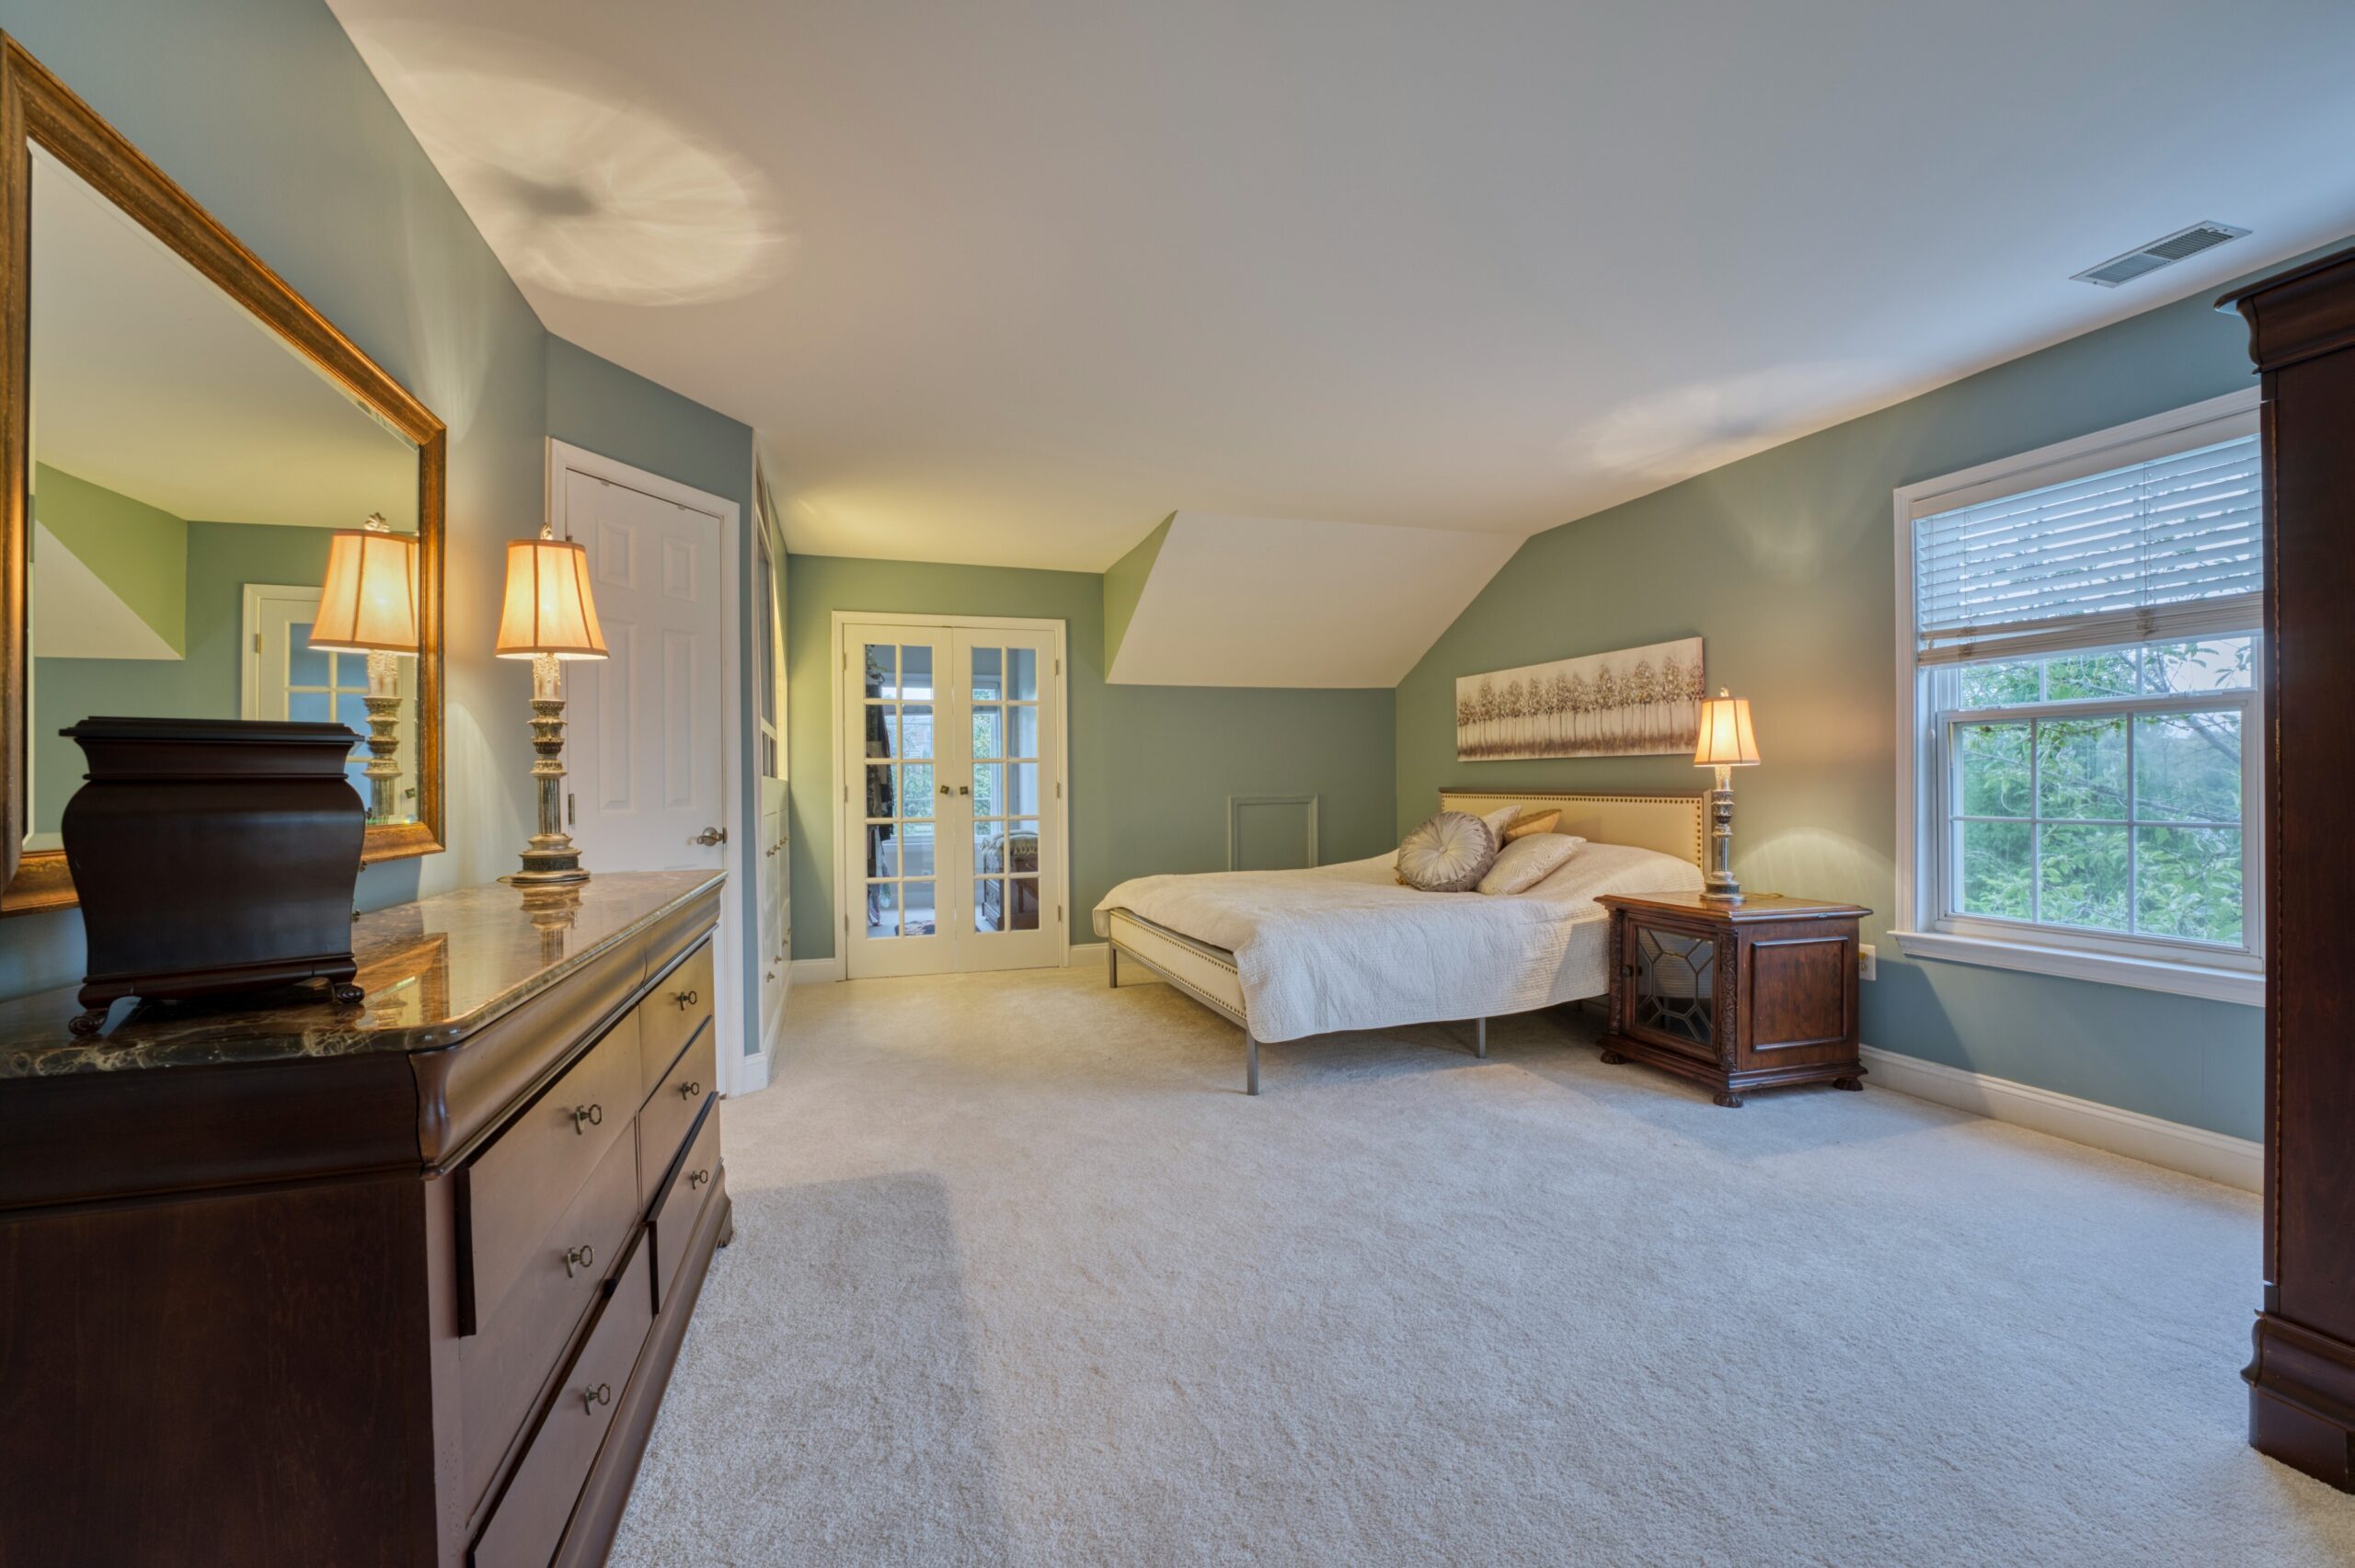 Professional interior photo of 16961 Heather Knolls Pl - showing the primary bedroom with french doors to one of the walk in closets